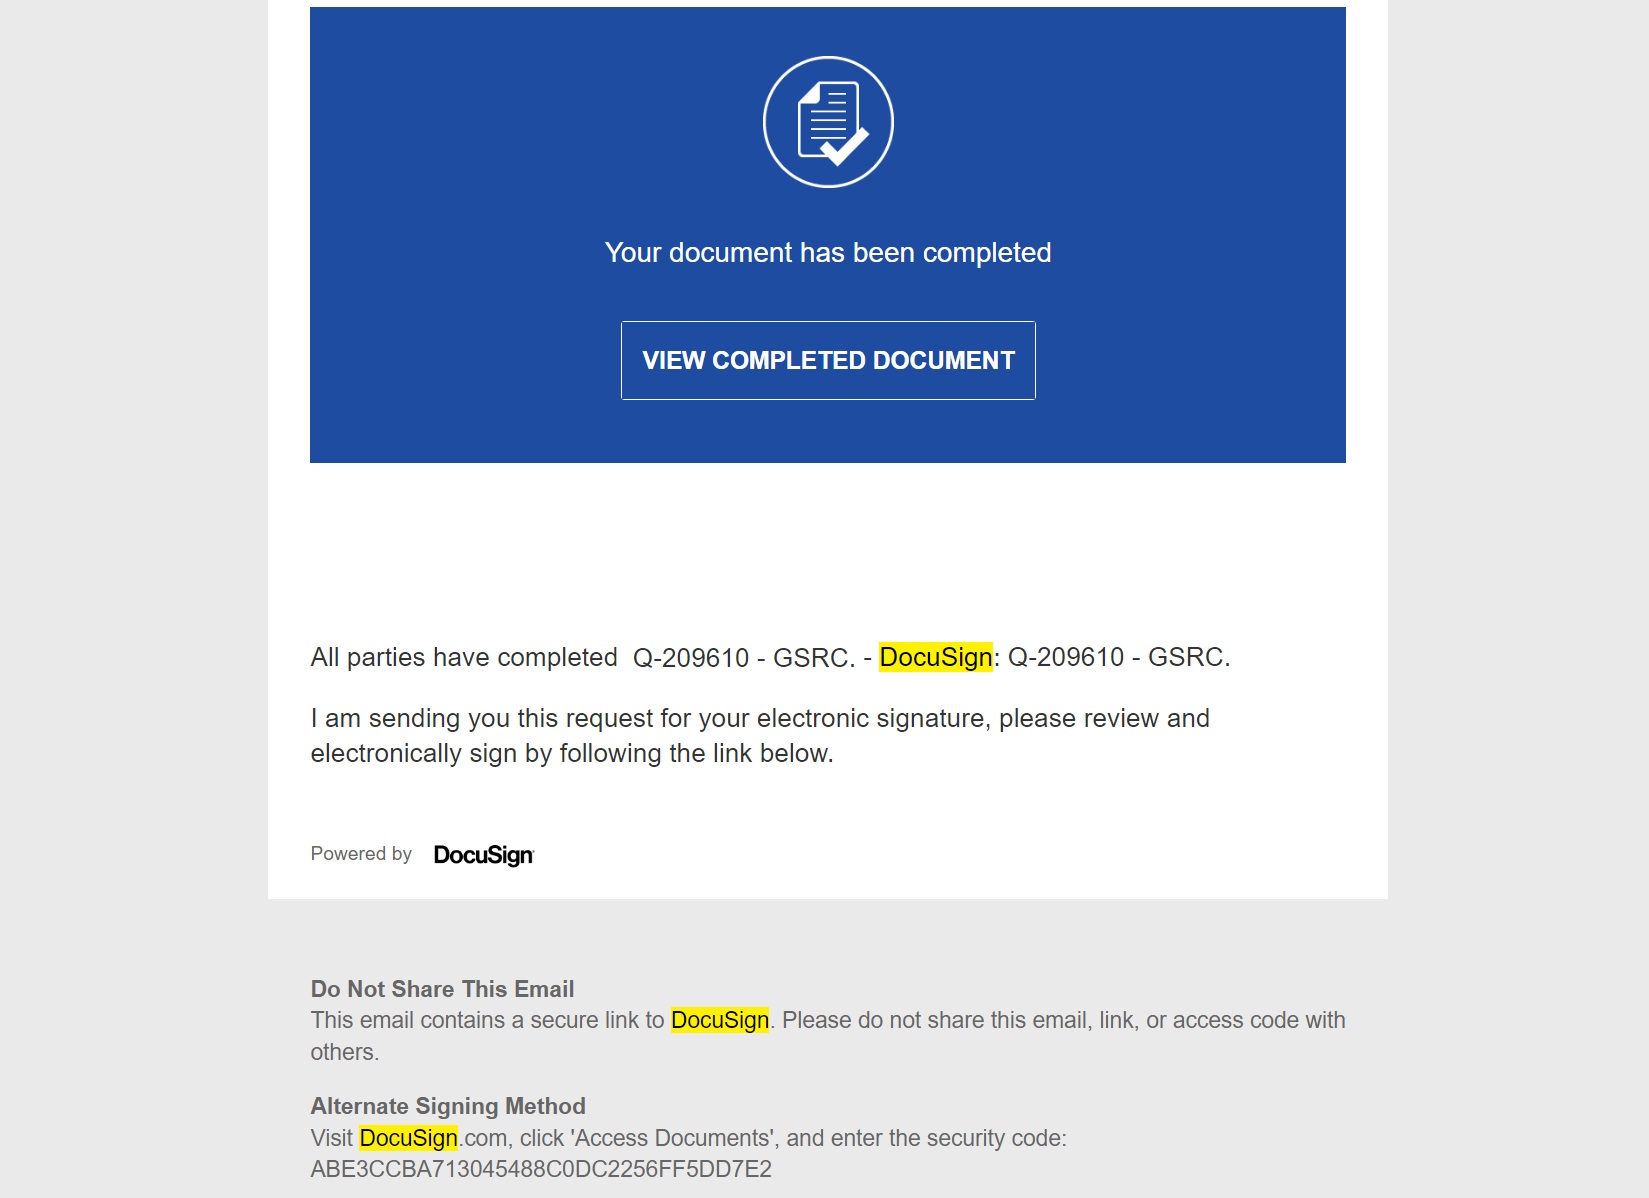 A fake DocuSign-branded notification stating "Your document has been completed" with a "View Completed Document" button for a document titled "Q-209610 - GSRC".